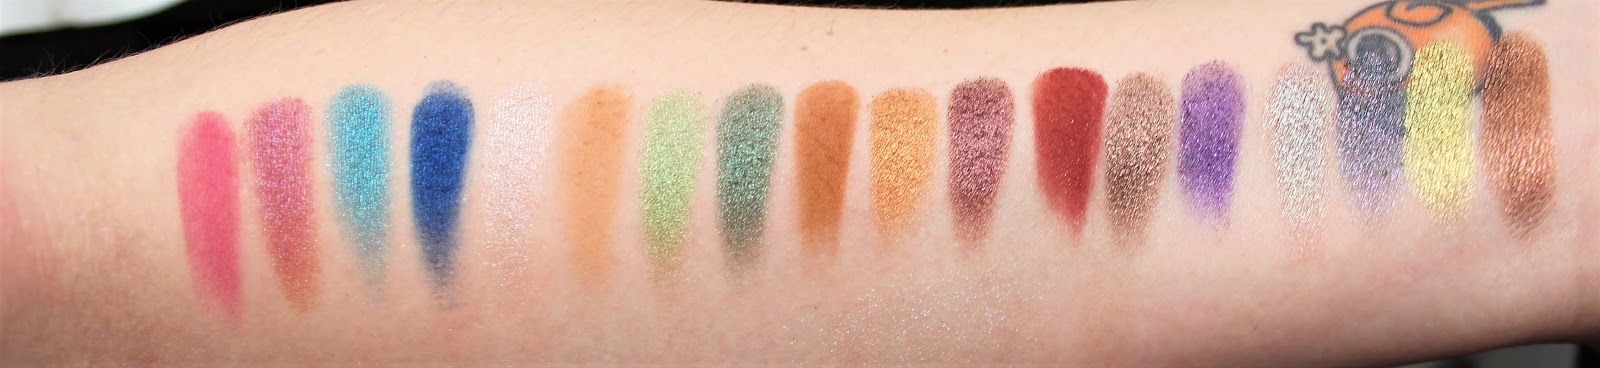 Urban Decay Elements Palette Review and Swatches